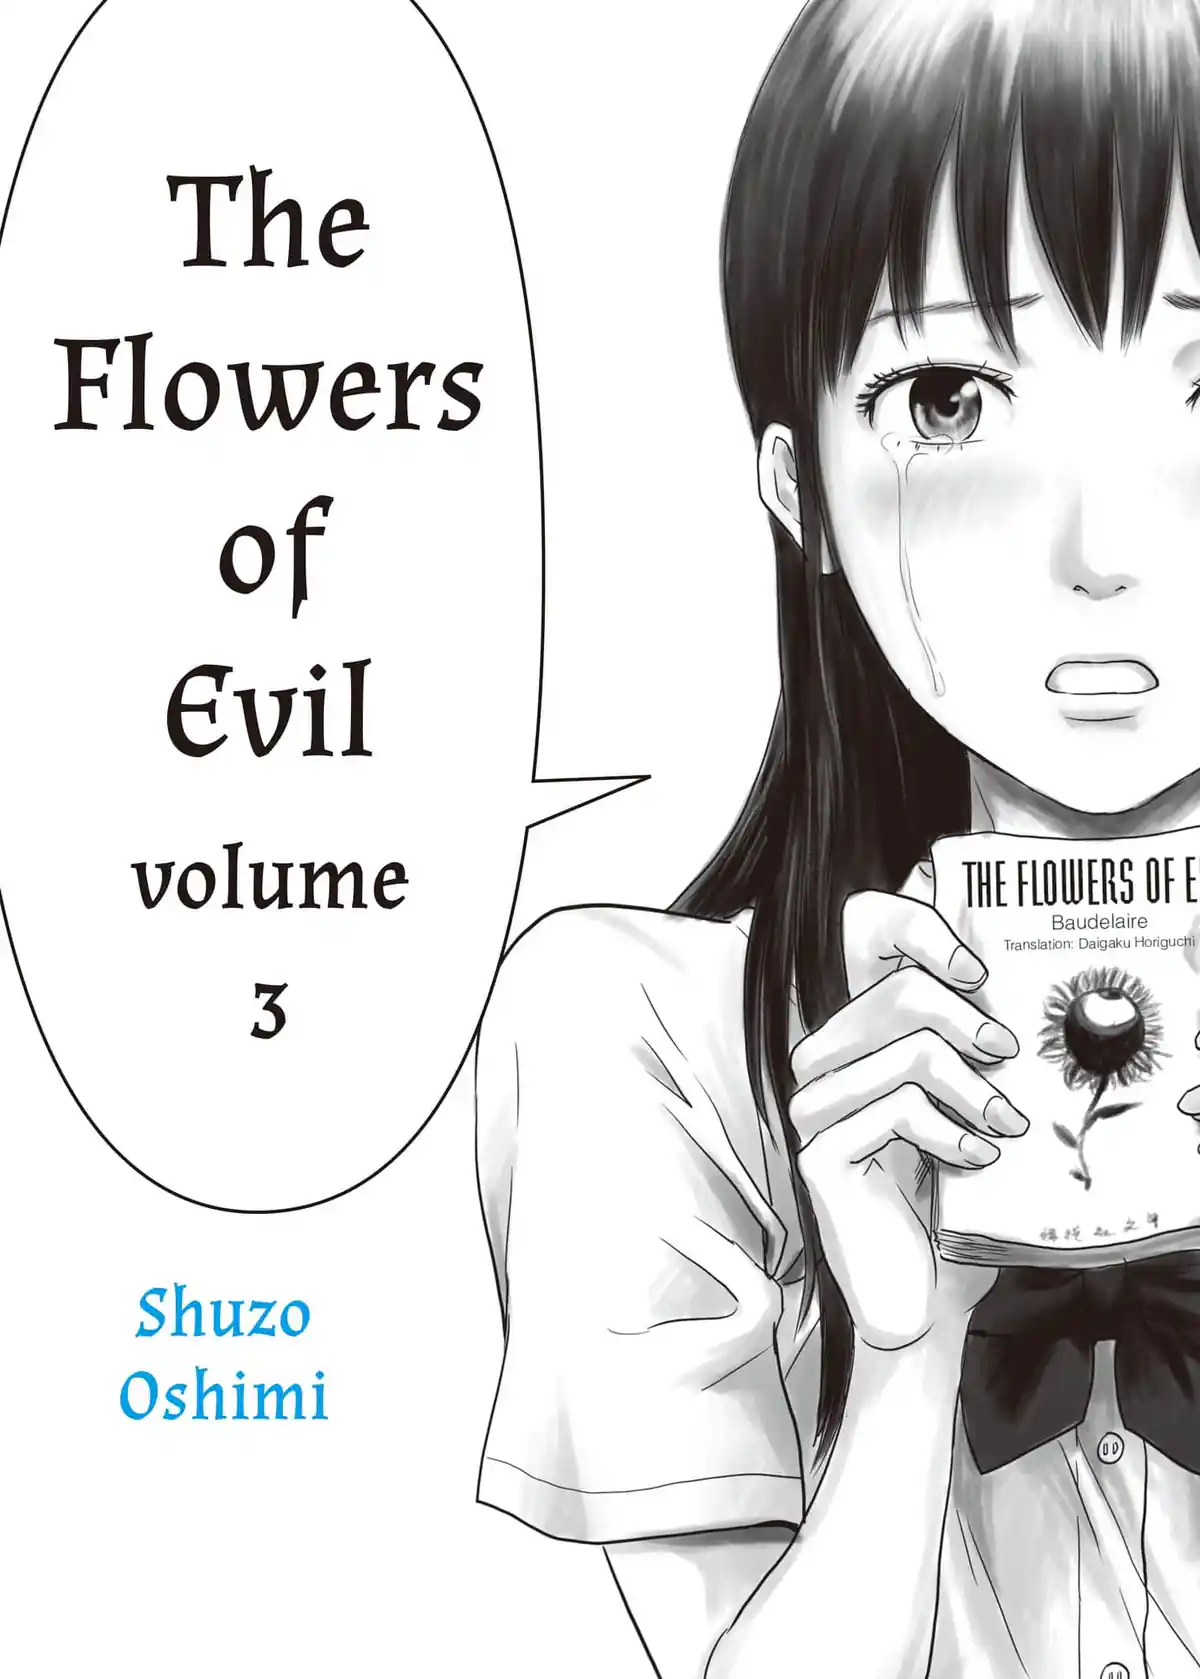 The Flowers of Evil, Chapter 35 - The Flowers of Evil Manga Online